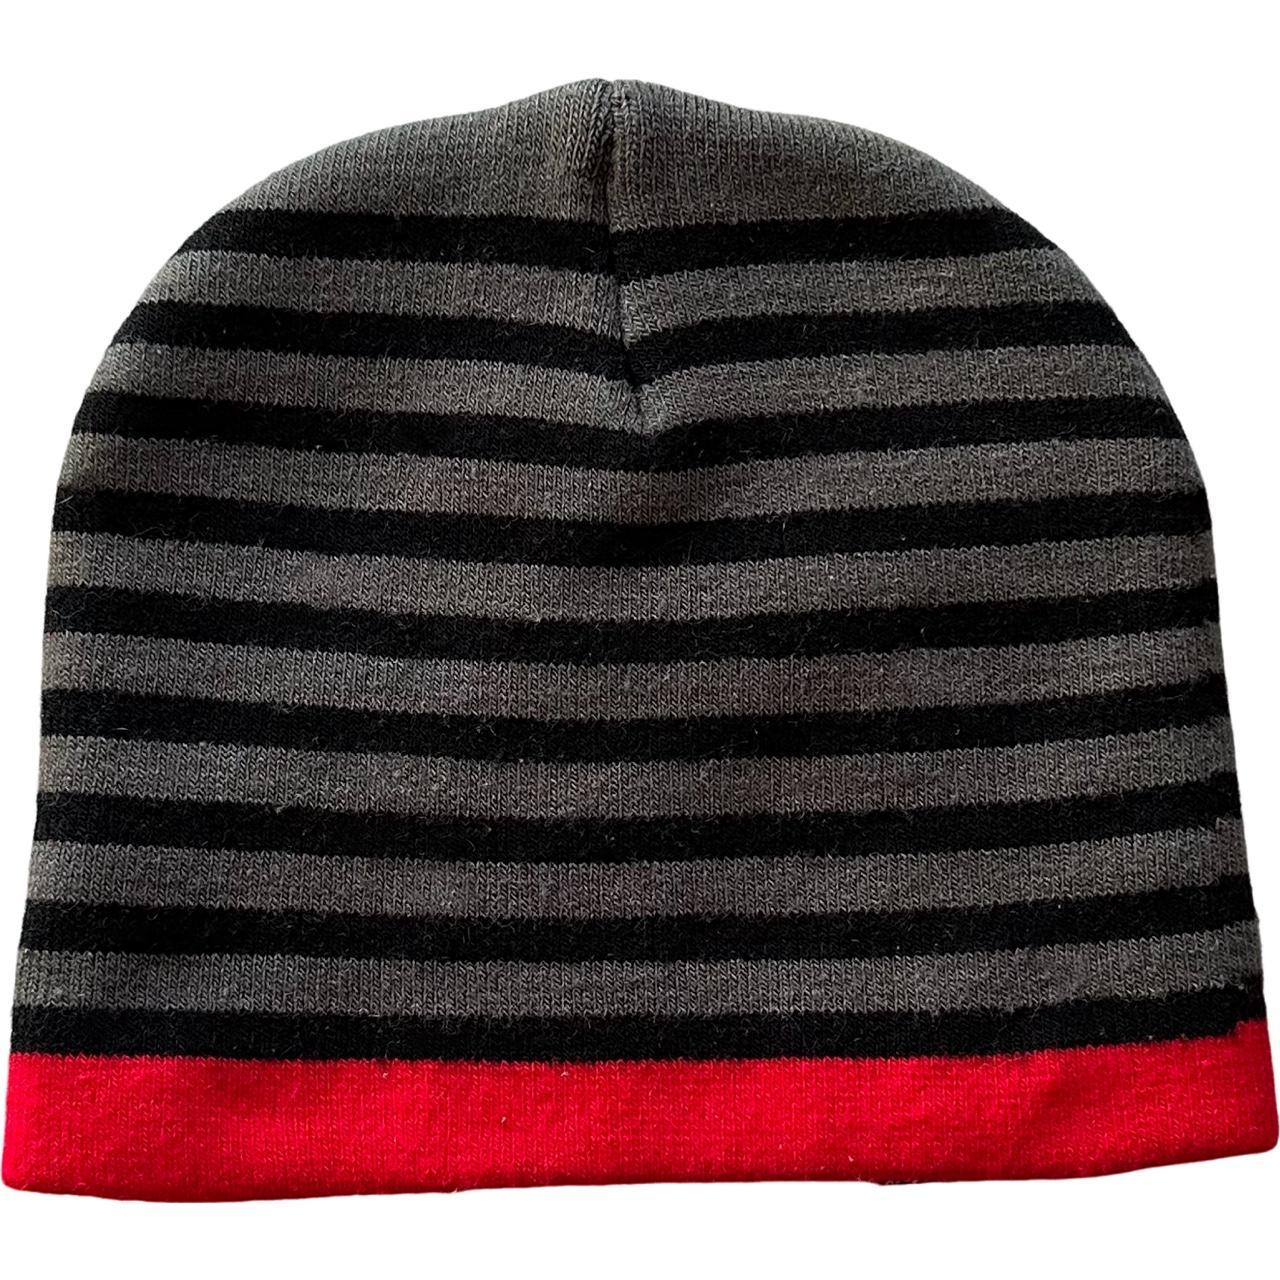 Authentic Betty Boop Beanie Condition